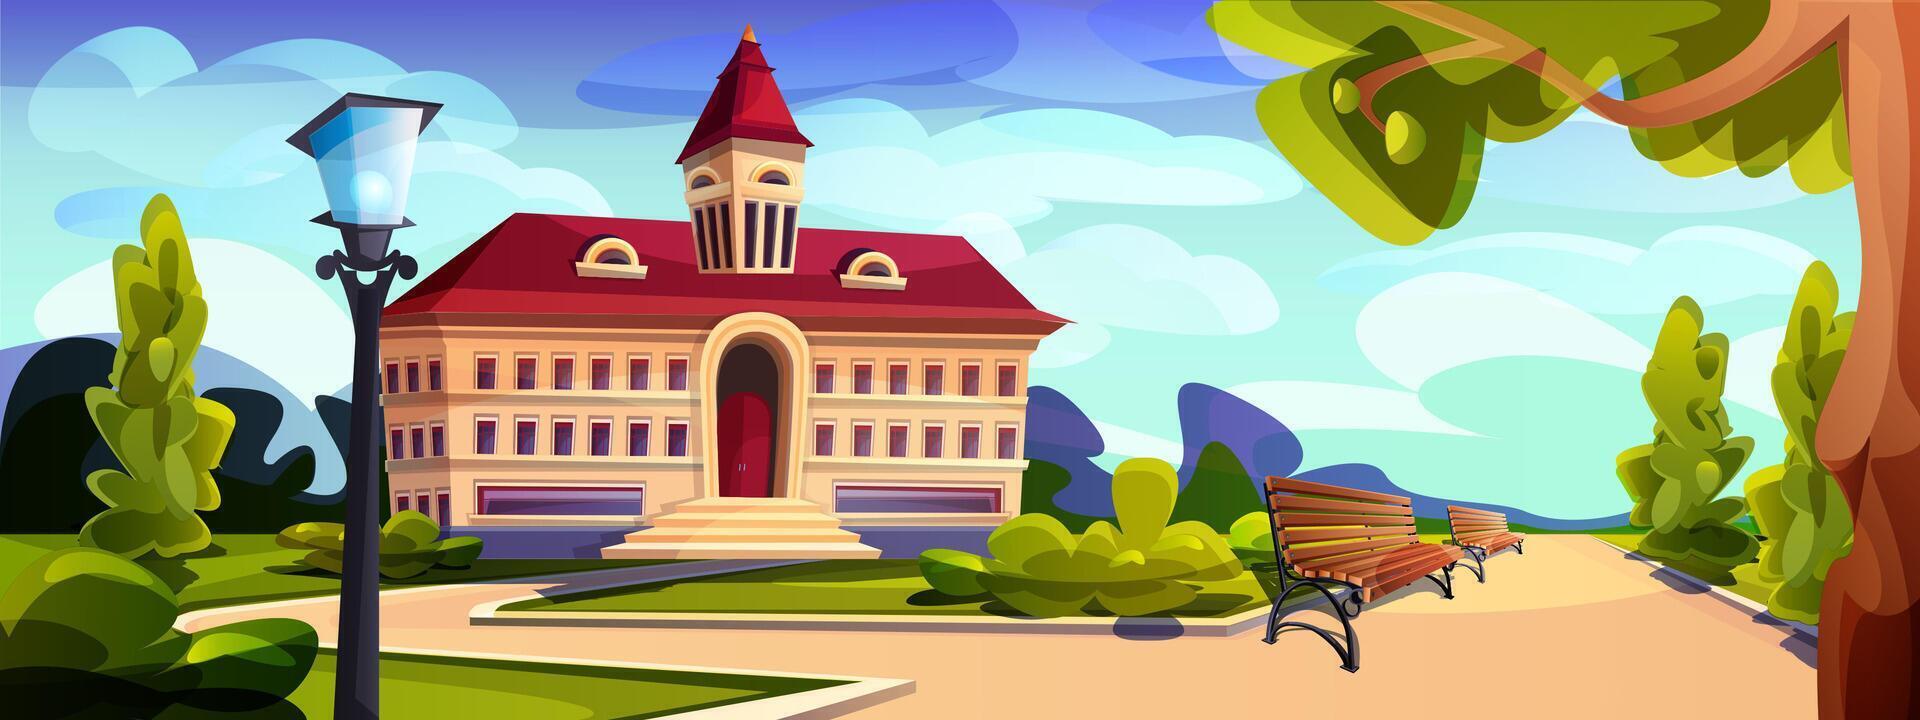 Cartoon building exterior of university, college or high school. Educational institution with empty yard with trees, lawn and benches. Summer landscape with schoolhouse, government house or campus. vector